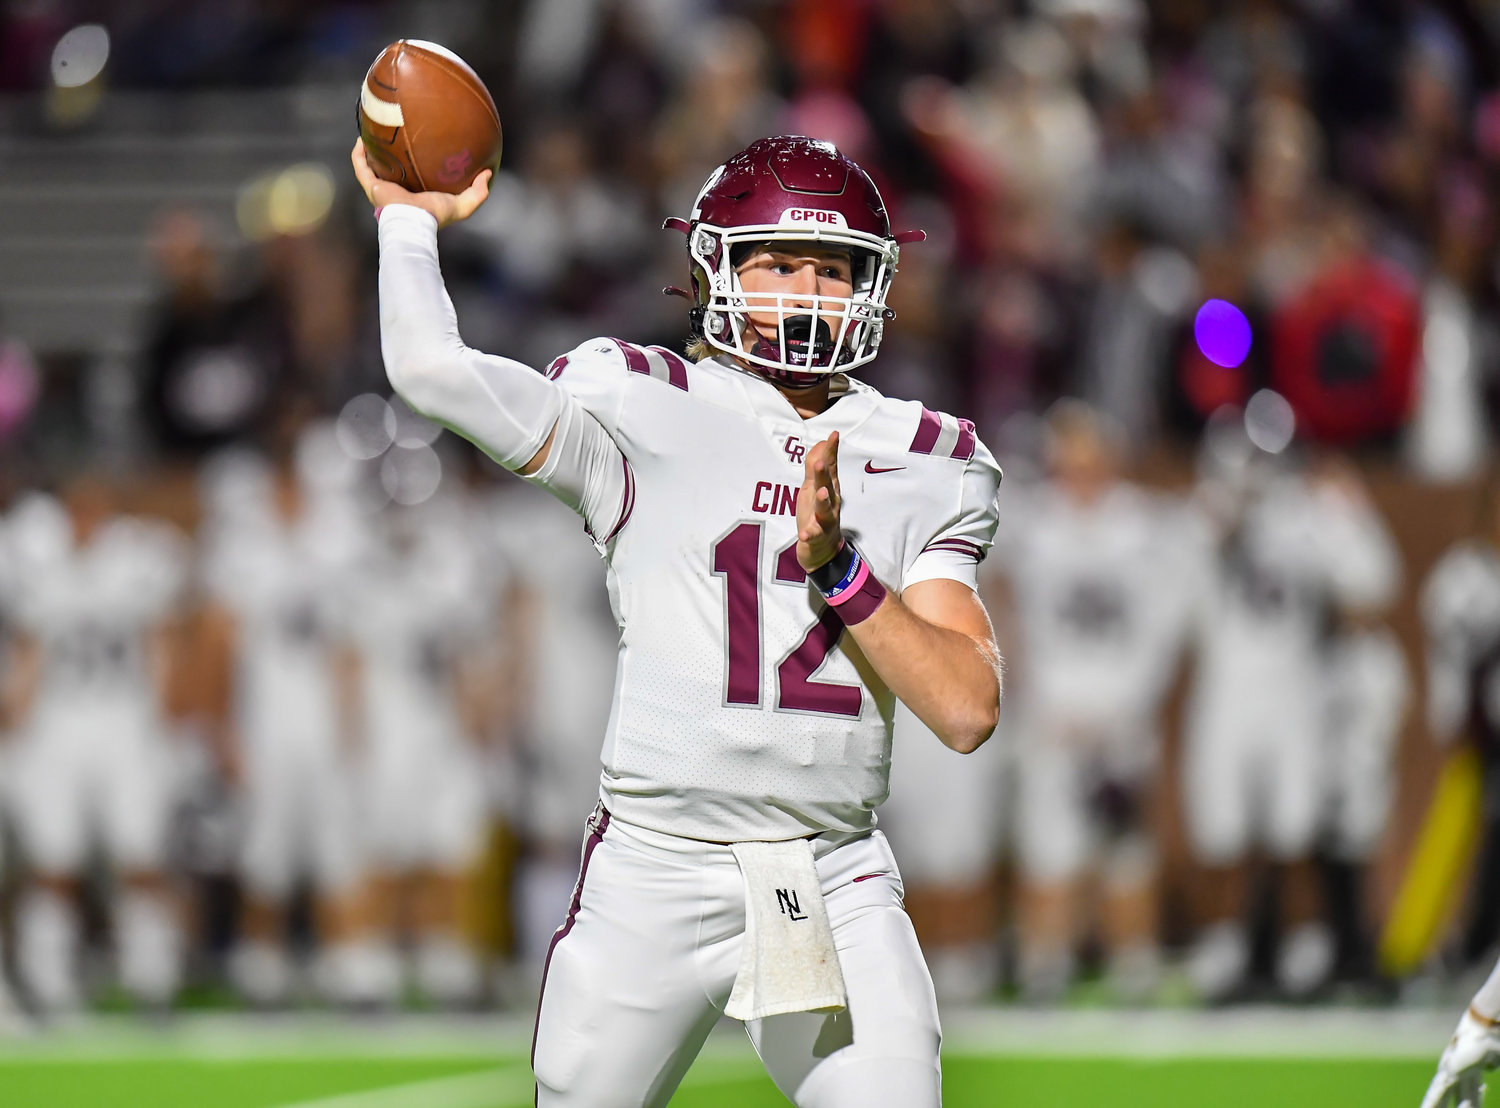 Katy, Tx. Oct. 29, 2021: Cinco Ranch's QB Gavin Rutherford #12 delivers a pass during a conference game between Cinco Ranch and Morton Ranch at Rhodes Stadium in Katy. (Photo by Mark Goodman / Katy Times)